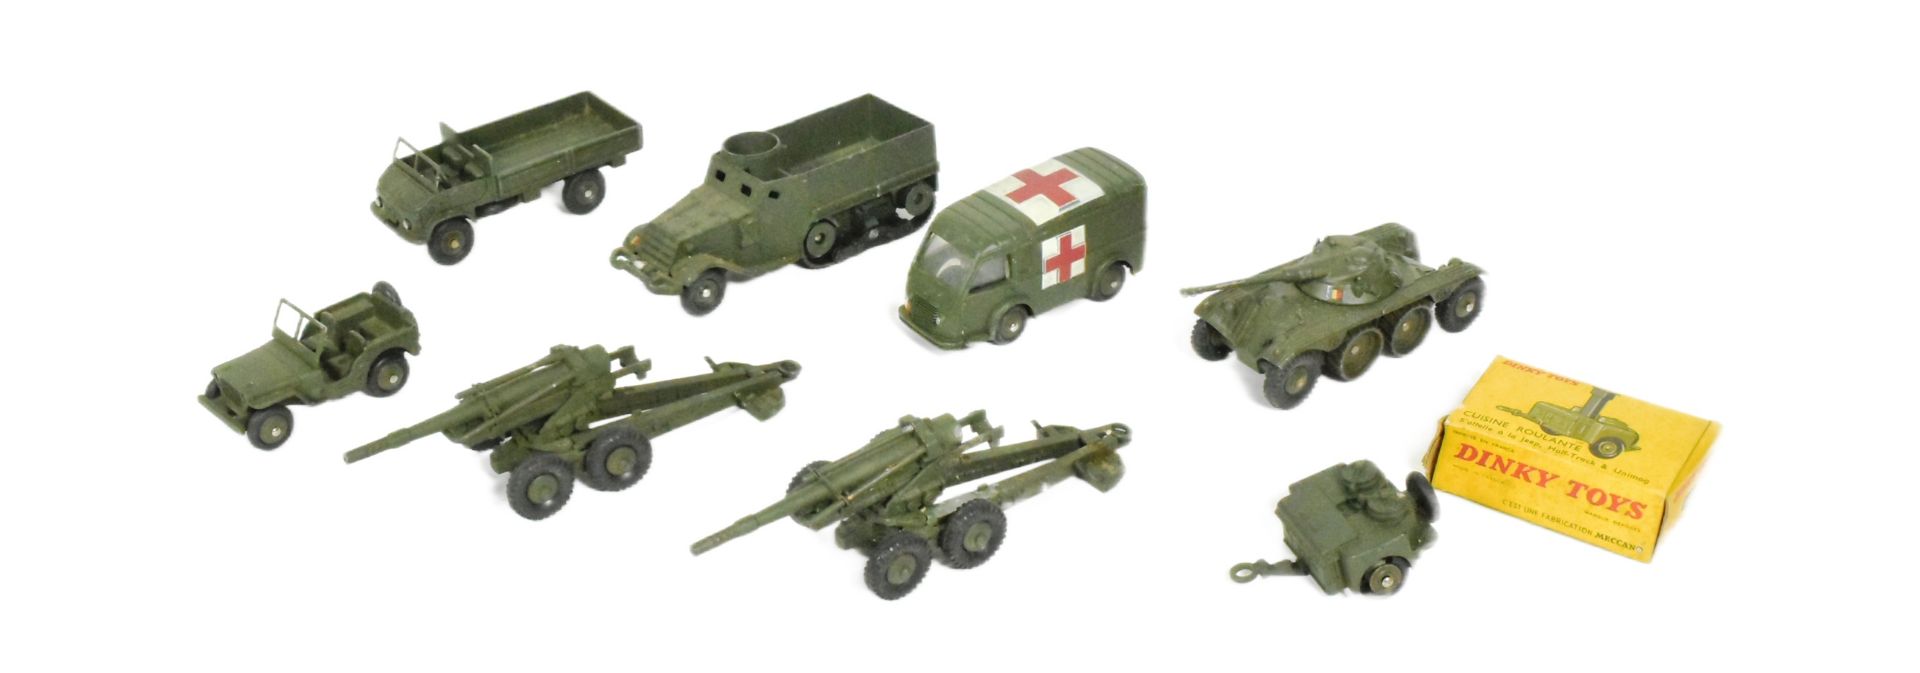 DIECAST - FRENCH DINKY TOYS - MILITARY DIECAST MODELS